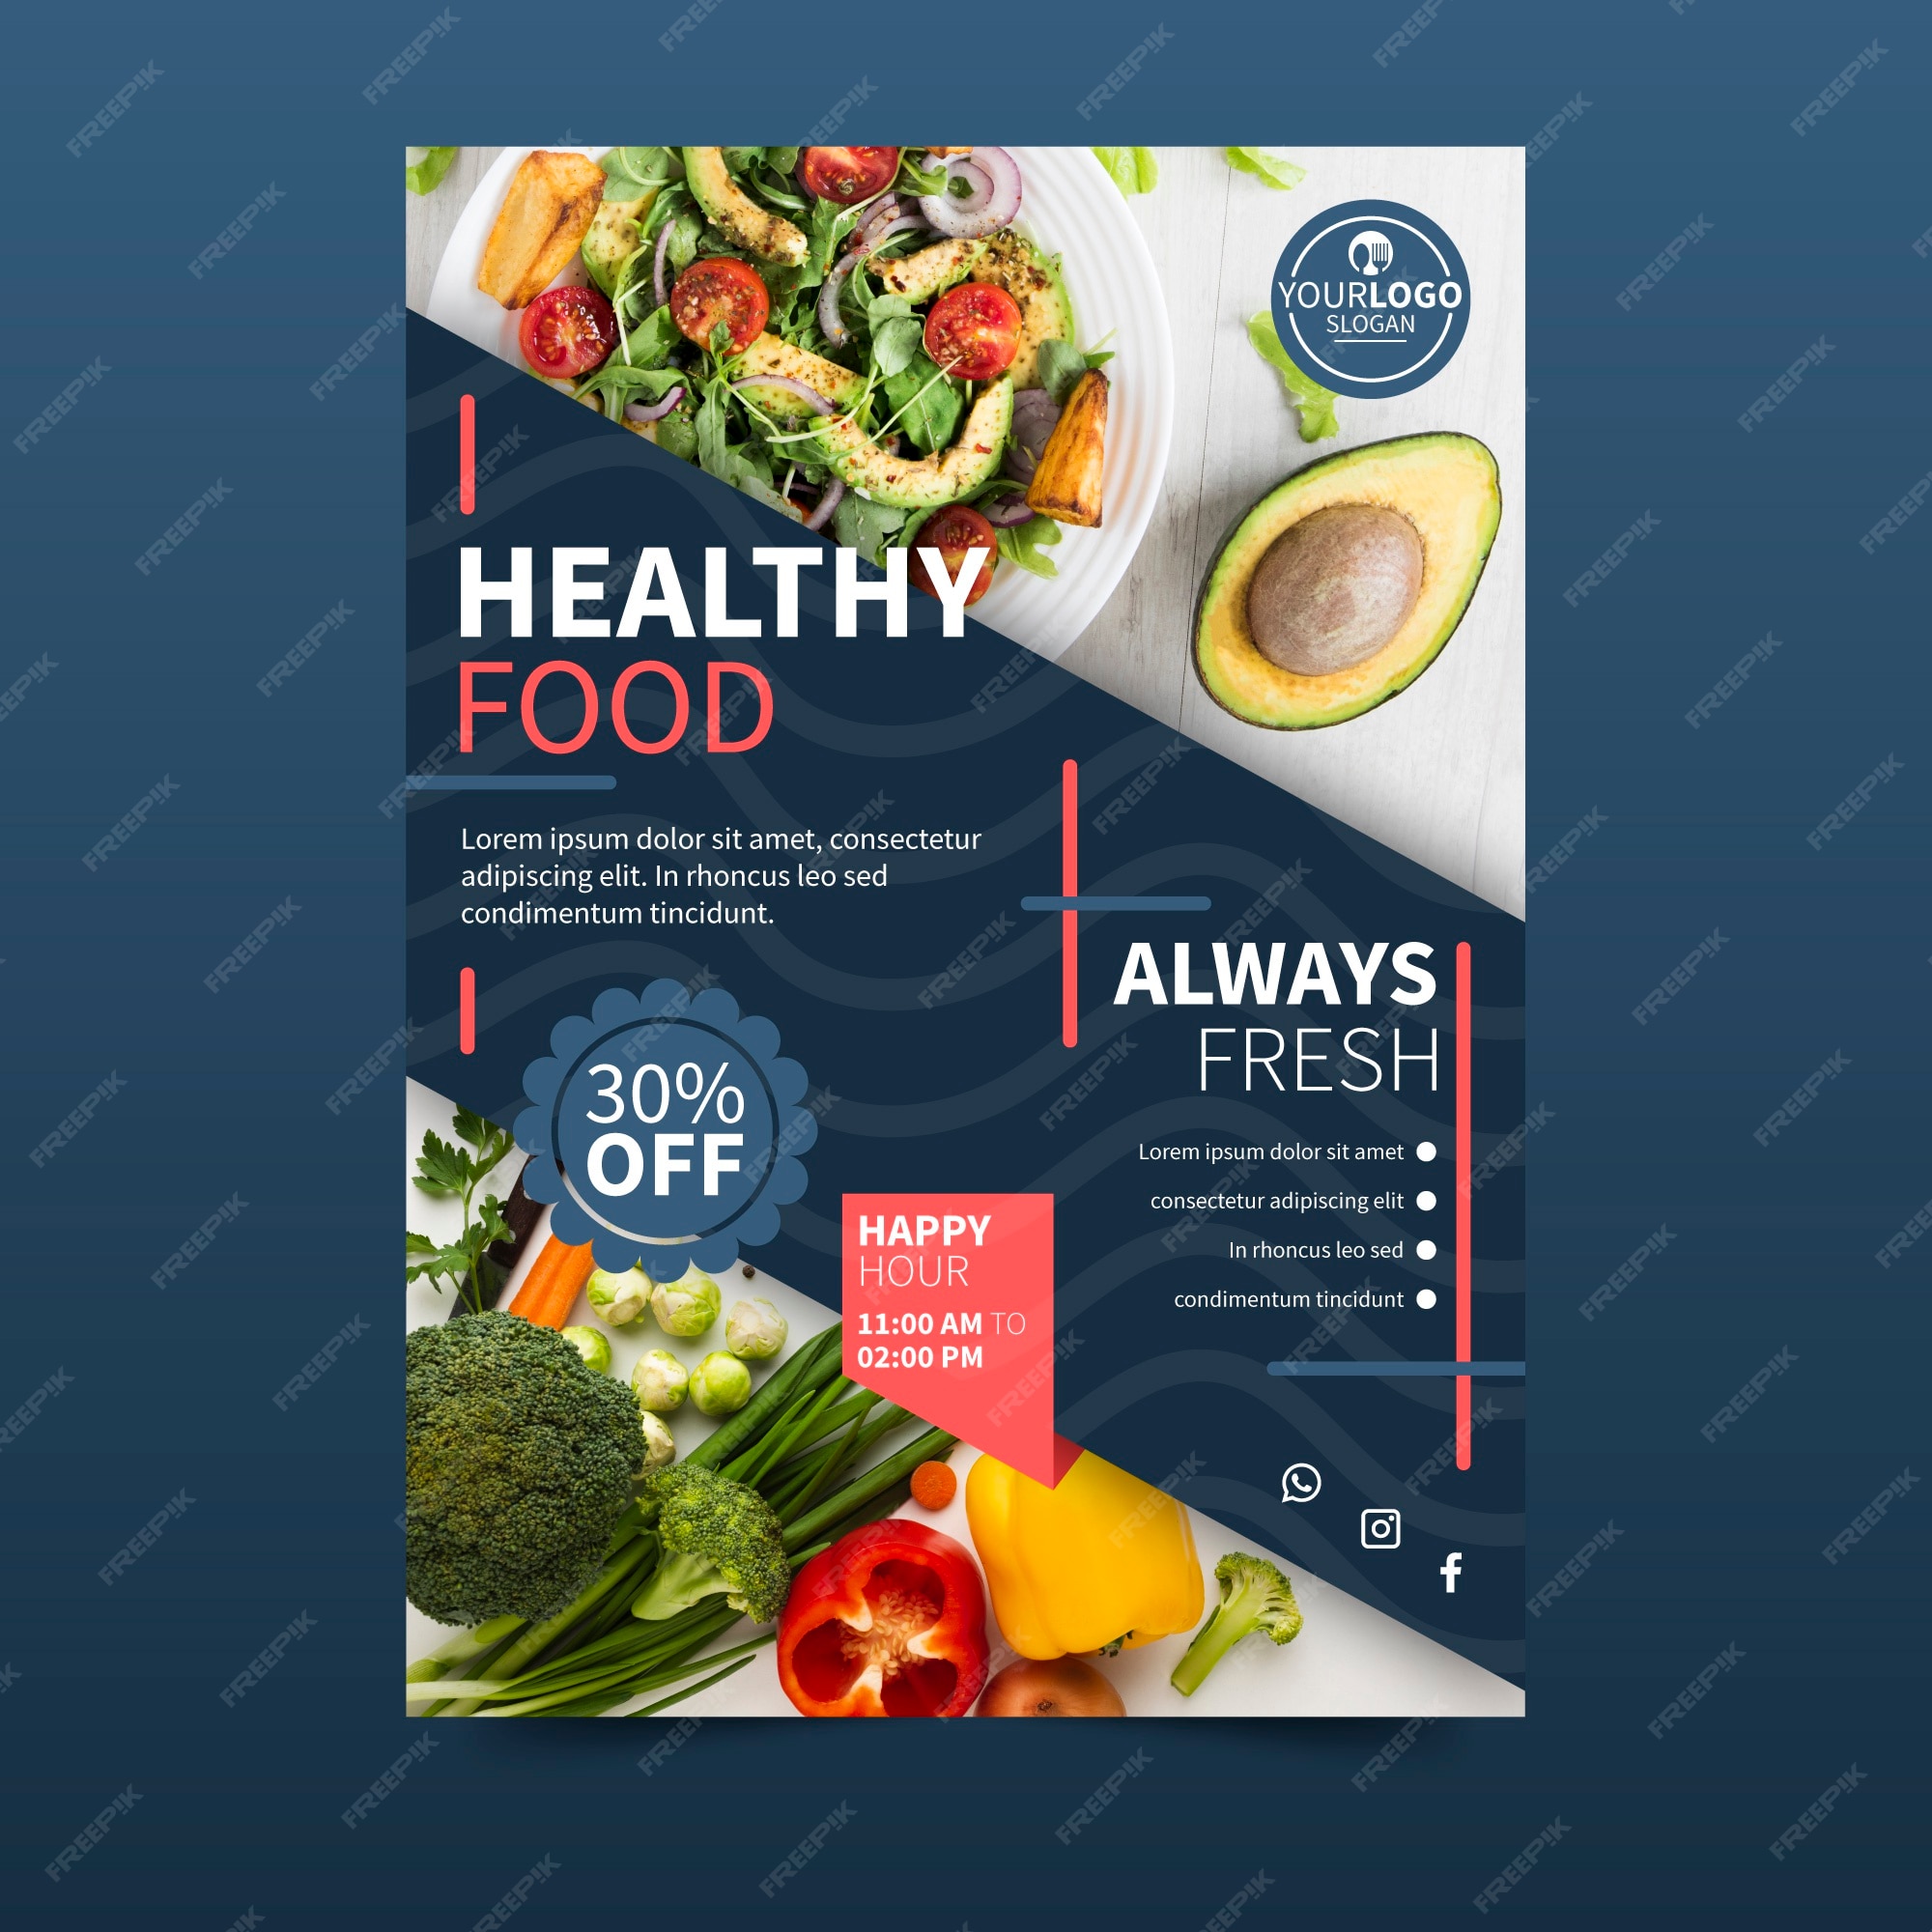 Free Vector | Healthy food restaurant poster design style